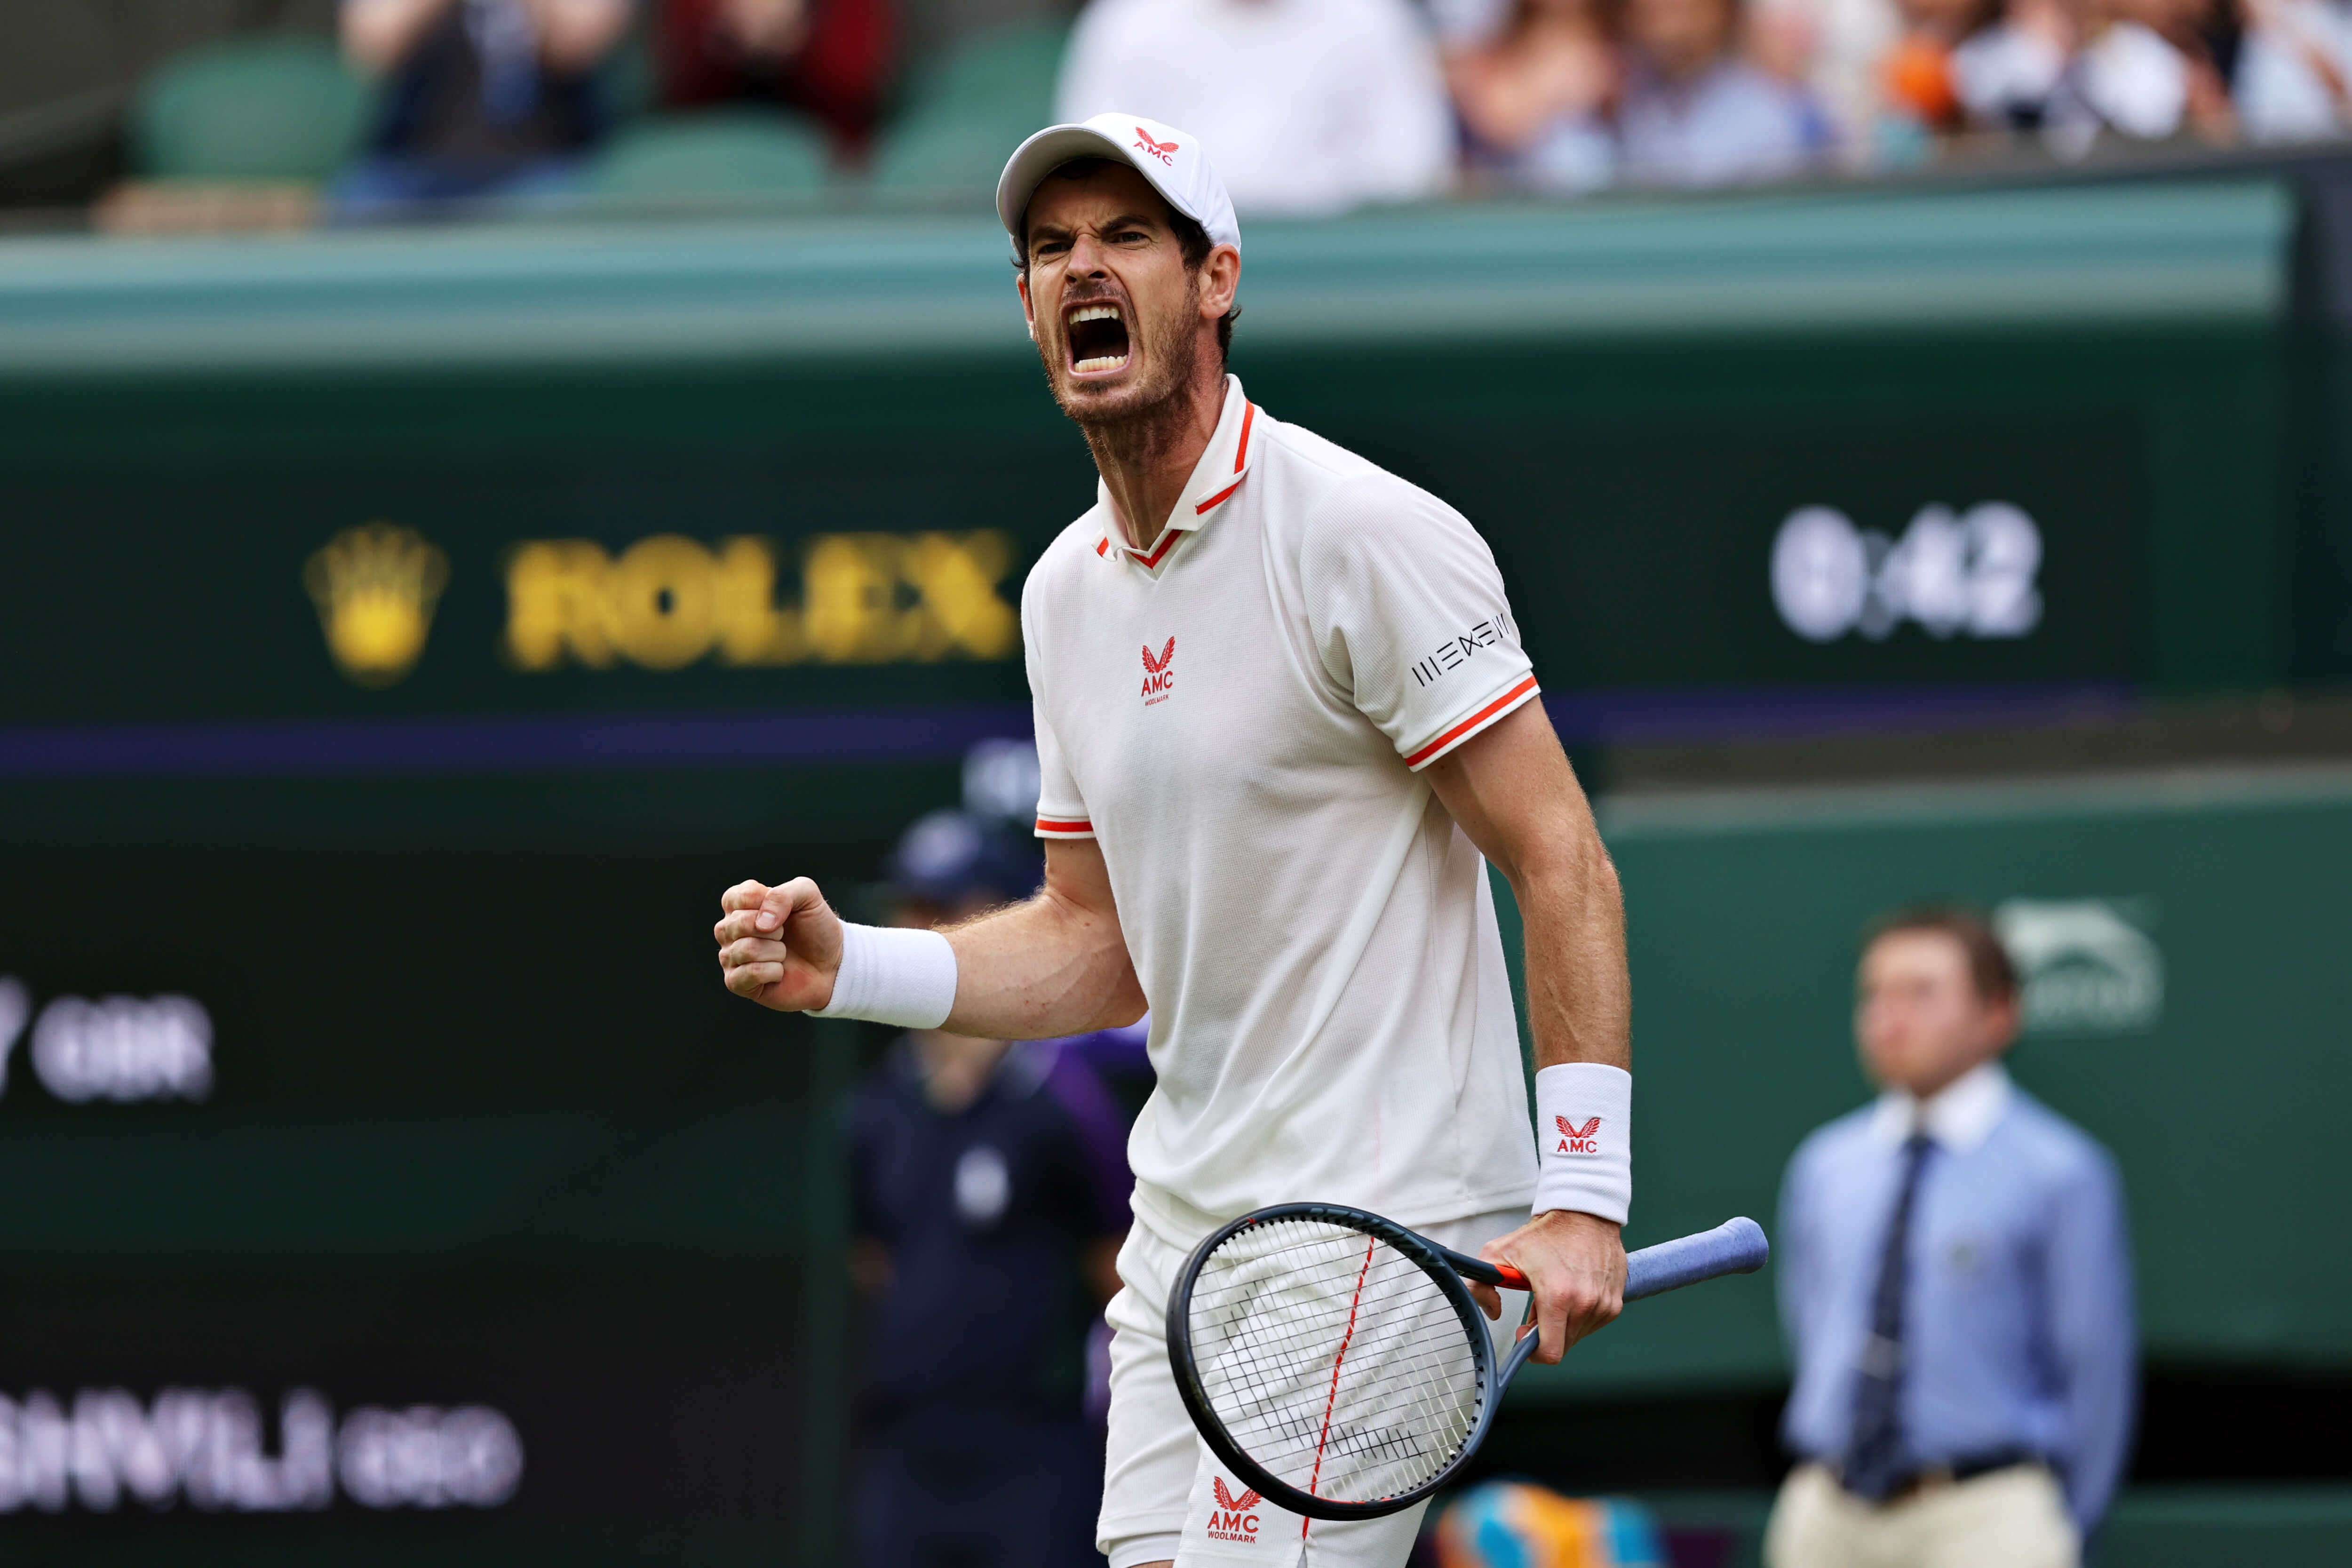 Andy Murray Tennis Player Profile and Rankings LTA